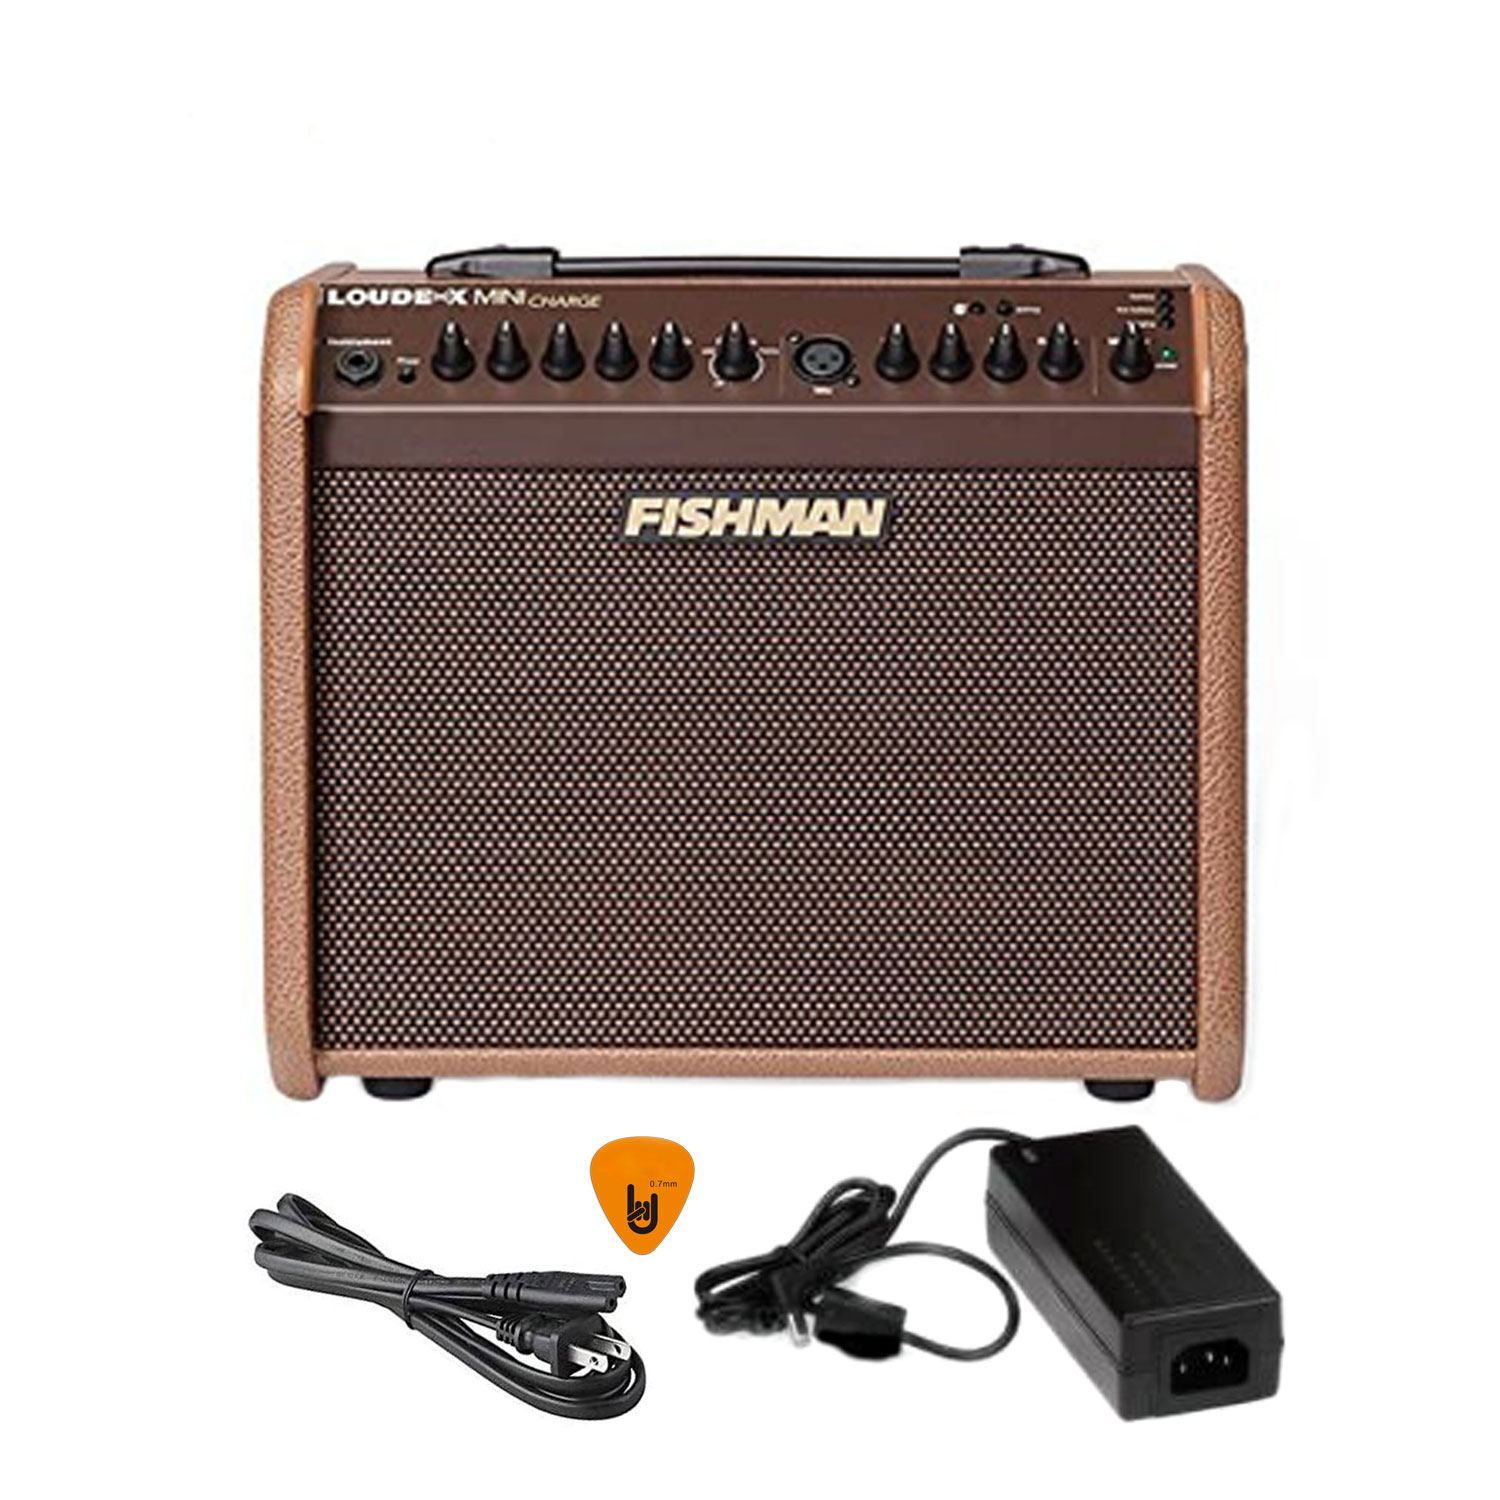 Fishman_Loudbox_Mini_Charge_60W_Battery_Powered_Acoustic_Guitar_Amplifier